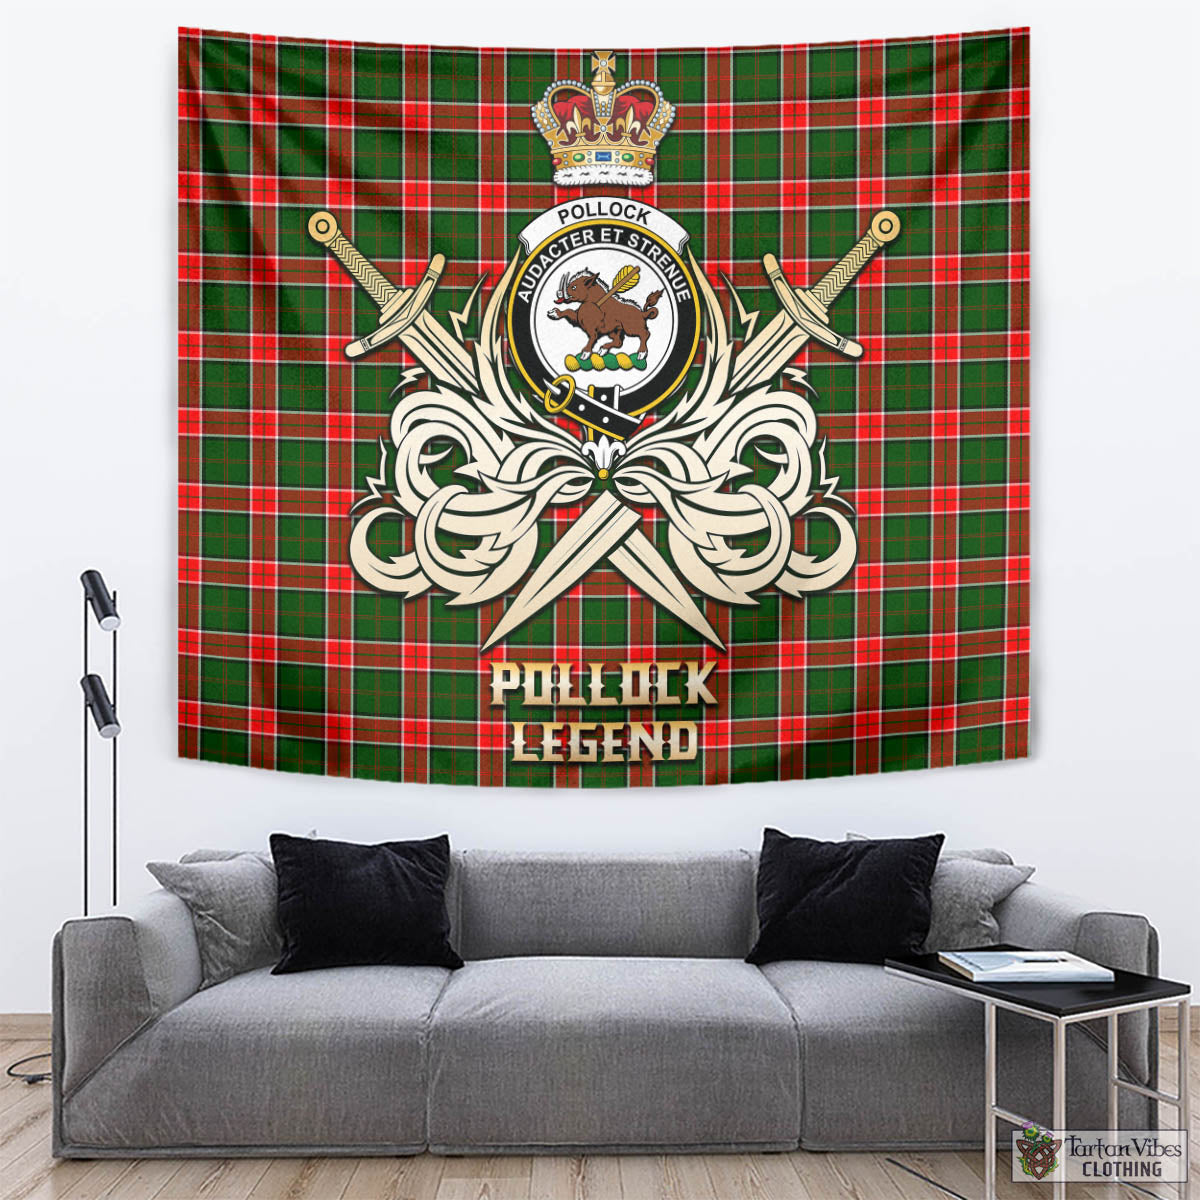 Tartan Vibes Clothing Pollock Modern Tartan Tapestry with Clan Crest and the Golden Sword of Courageous Legacy